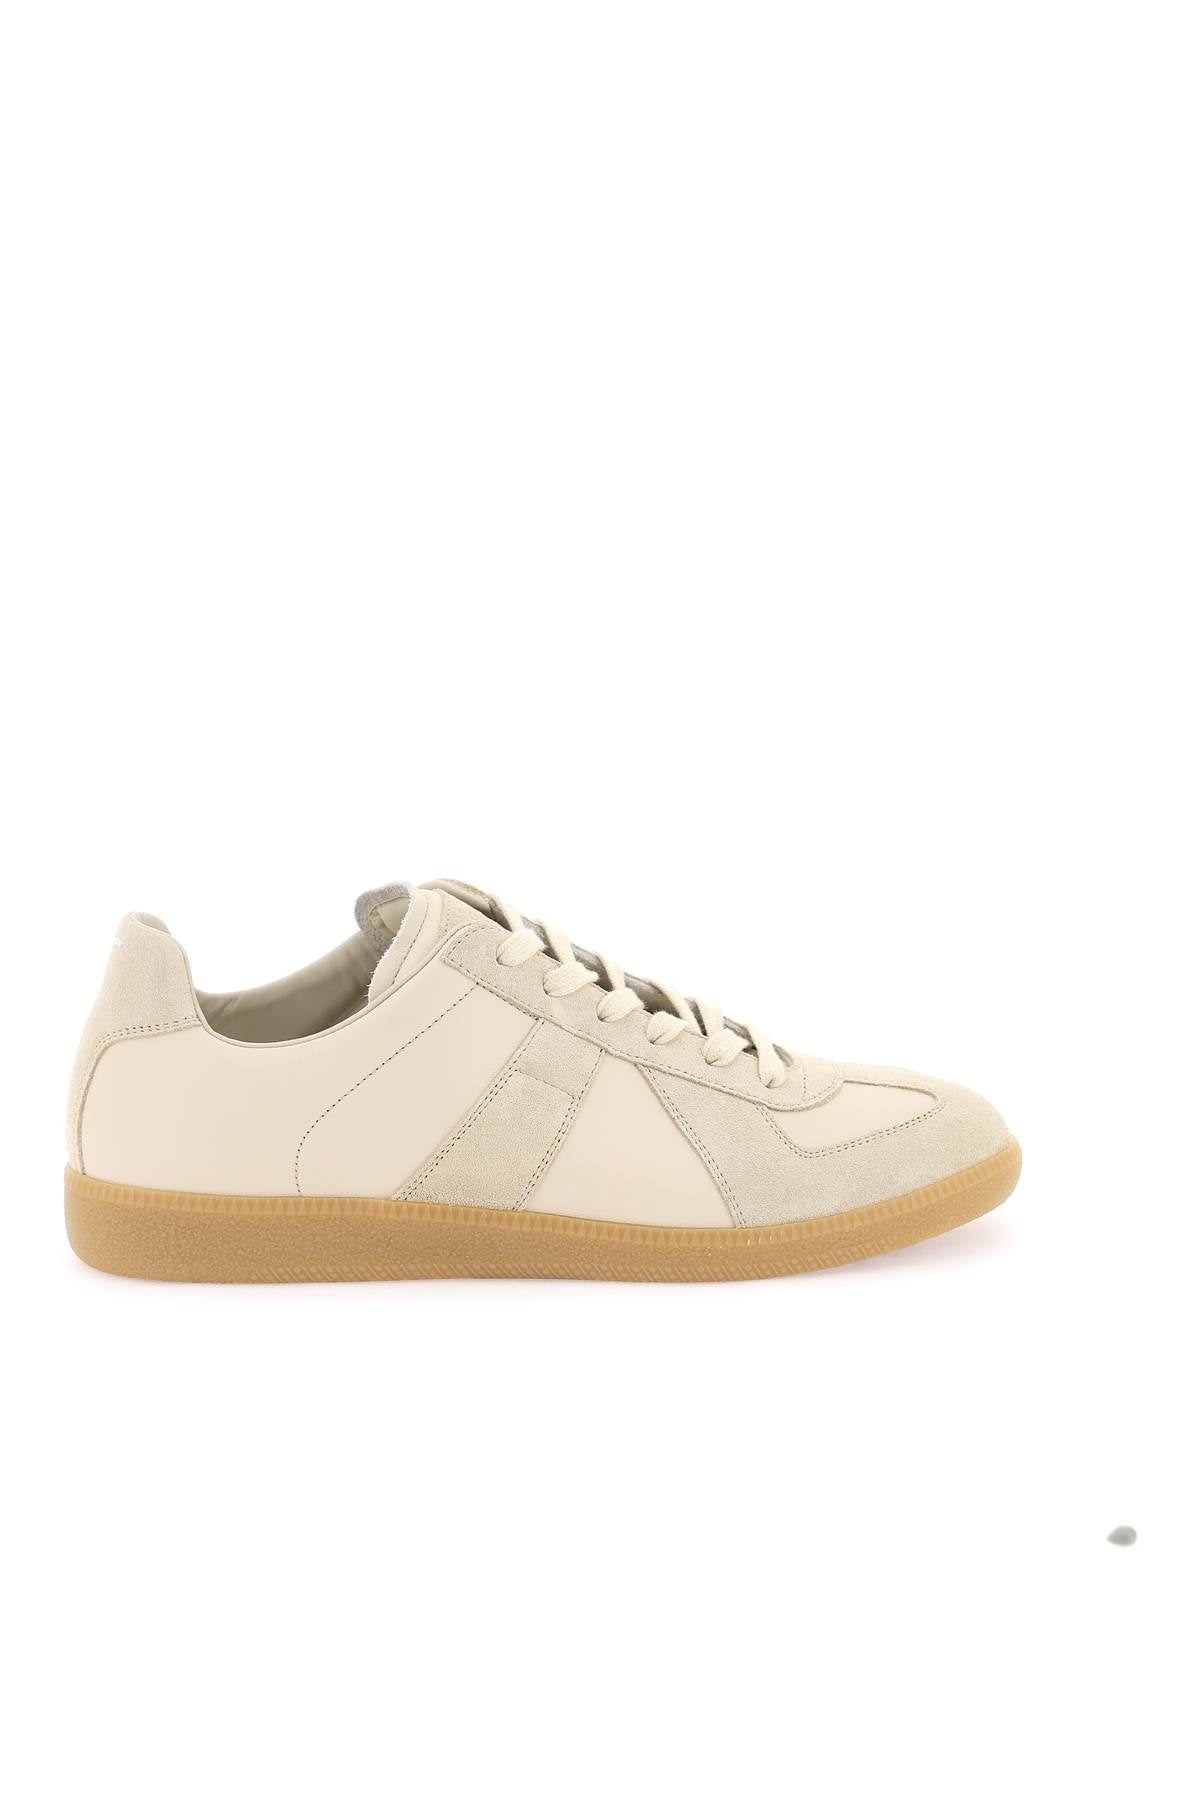 MAISON MARGIELA Men's Beige Leather Sneakers with Suede Inserts